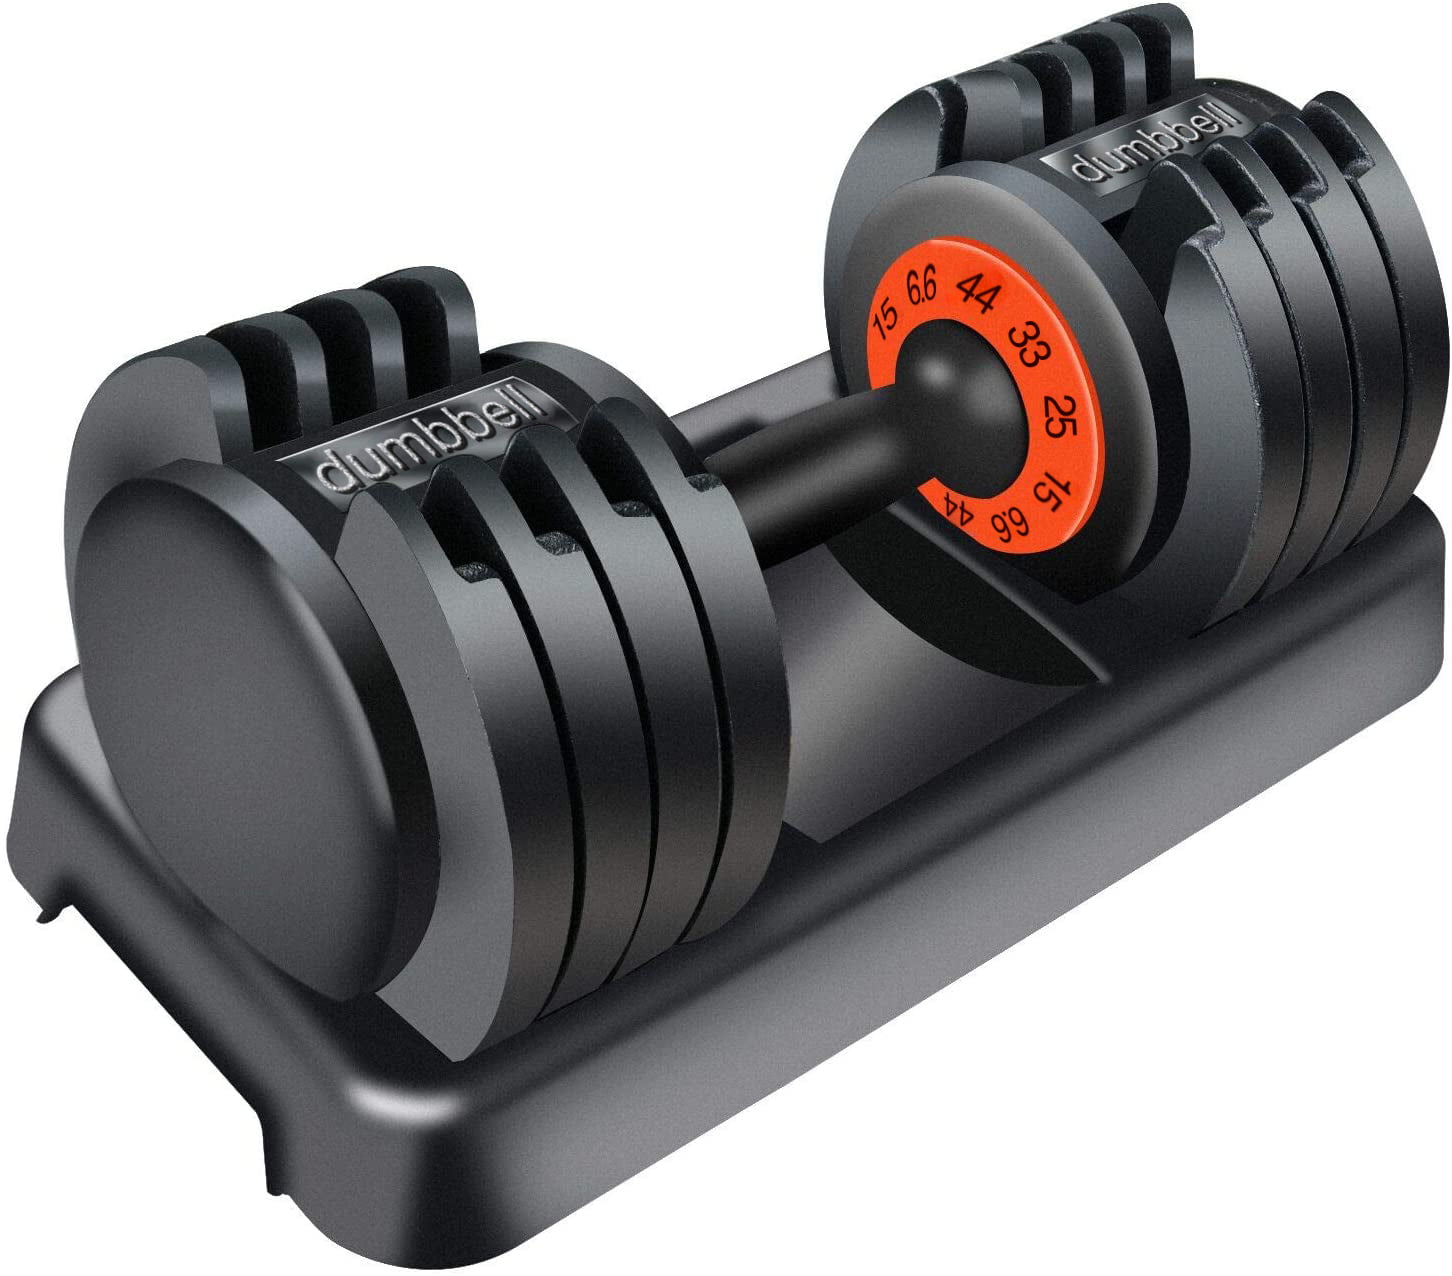 Adjustable Dumbbells,2 x 25 lbs Weights Set Fast Adjust Dumbbell Weight for Exercises Pair Dumbbells for Men and Women in Home Gym Workout Equipment,Set of 2 Packages 